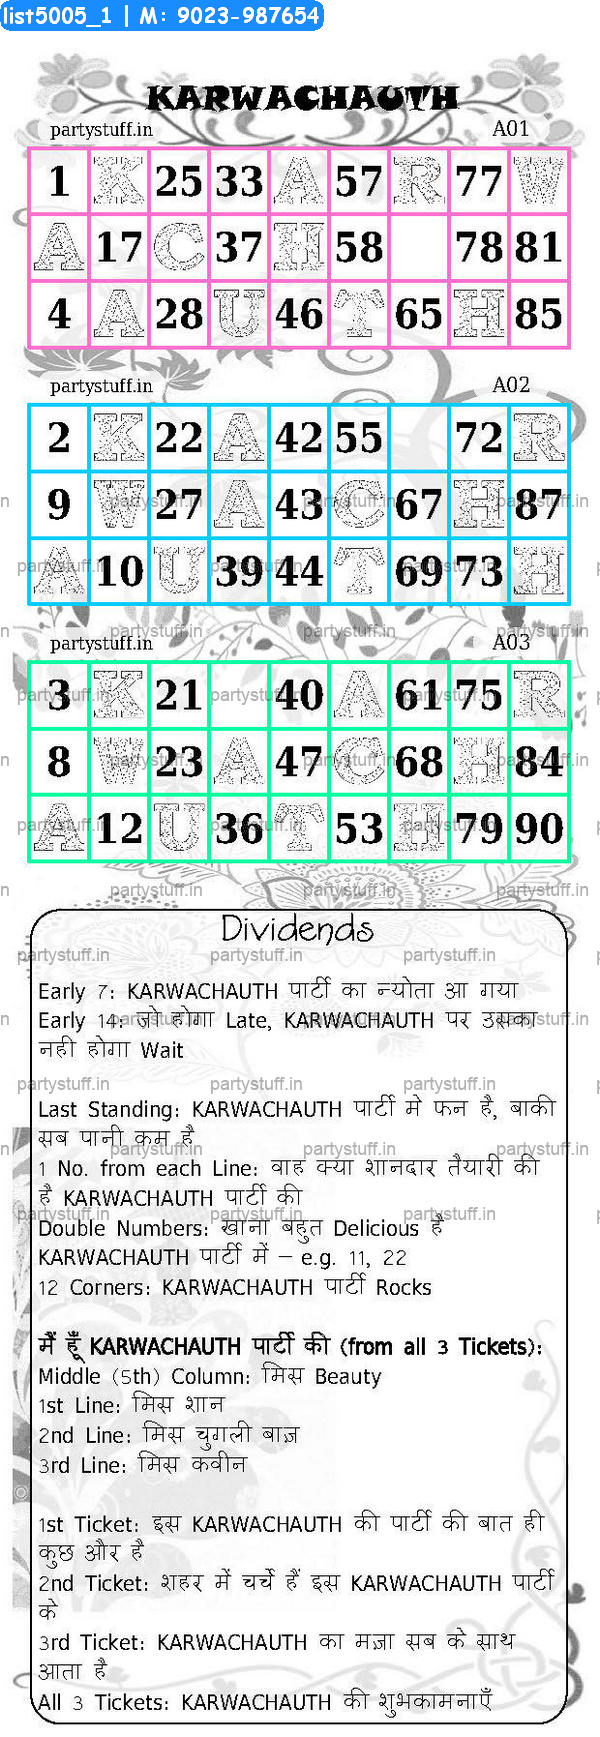 Karwachauth triplet classic grids dividends